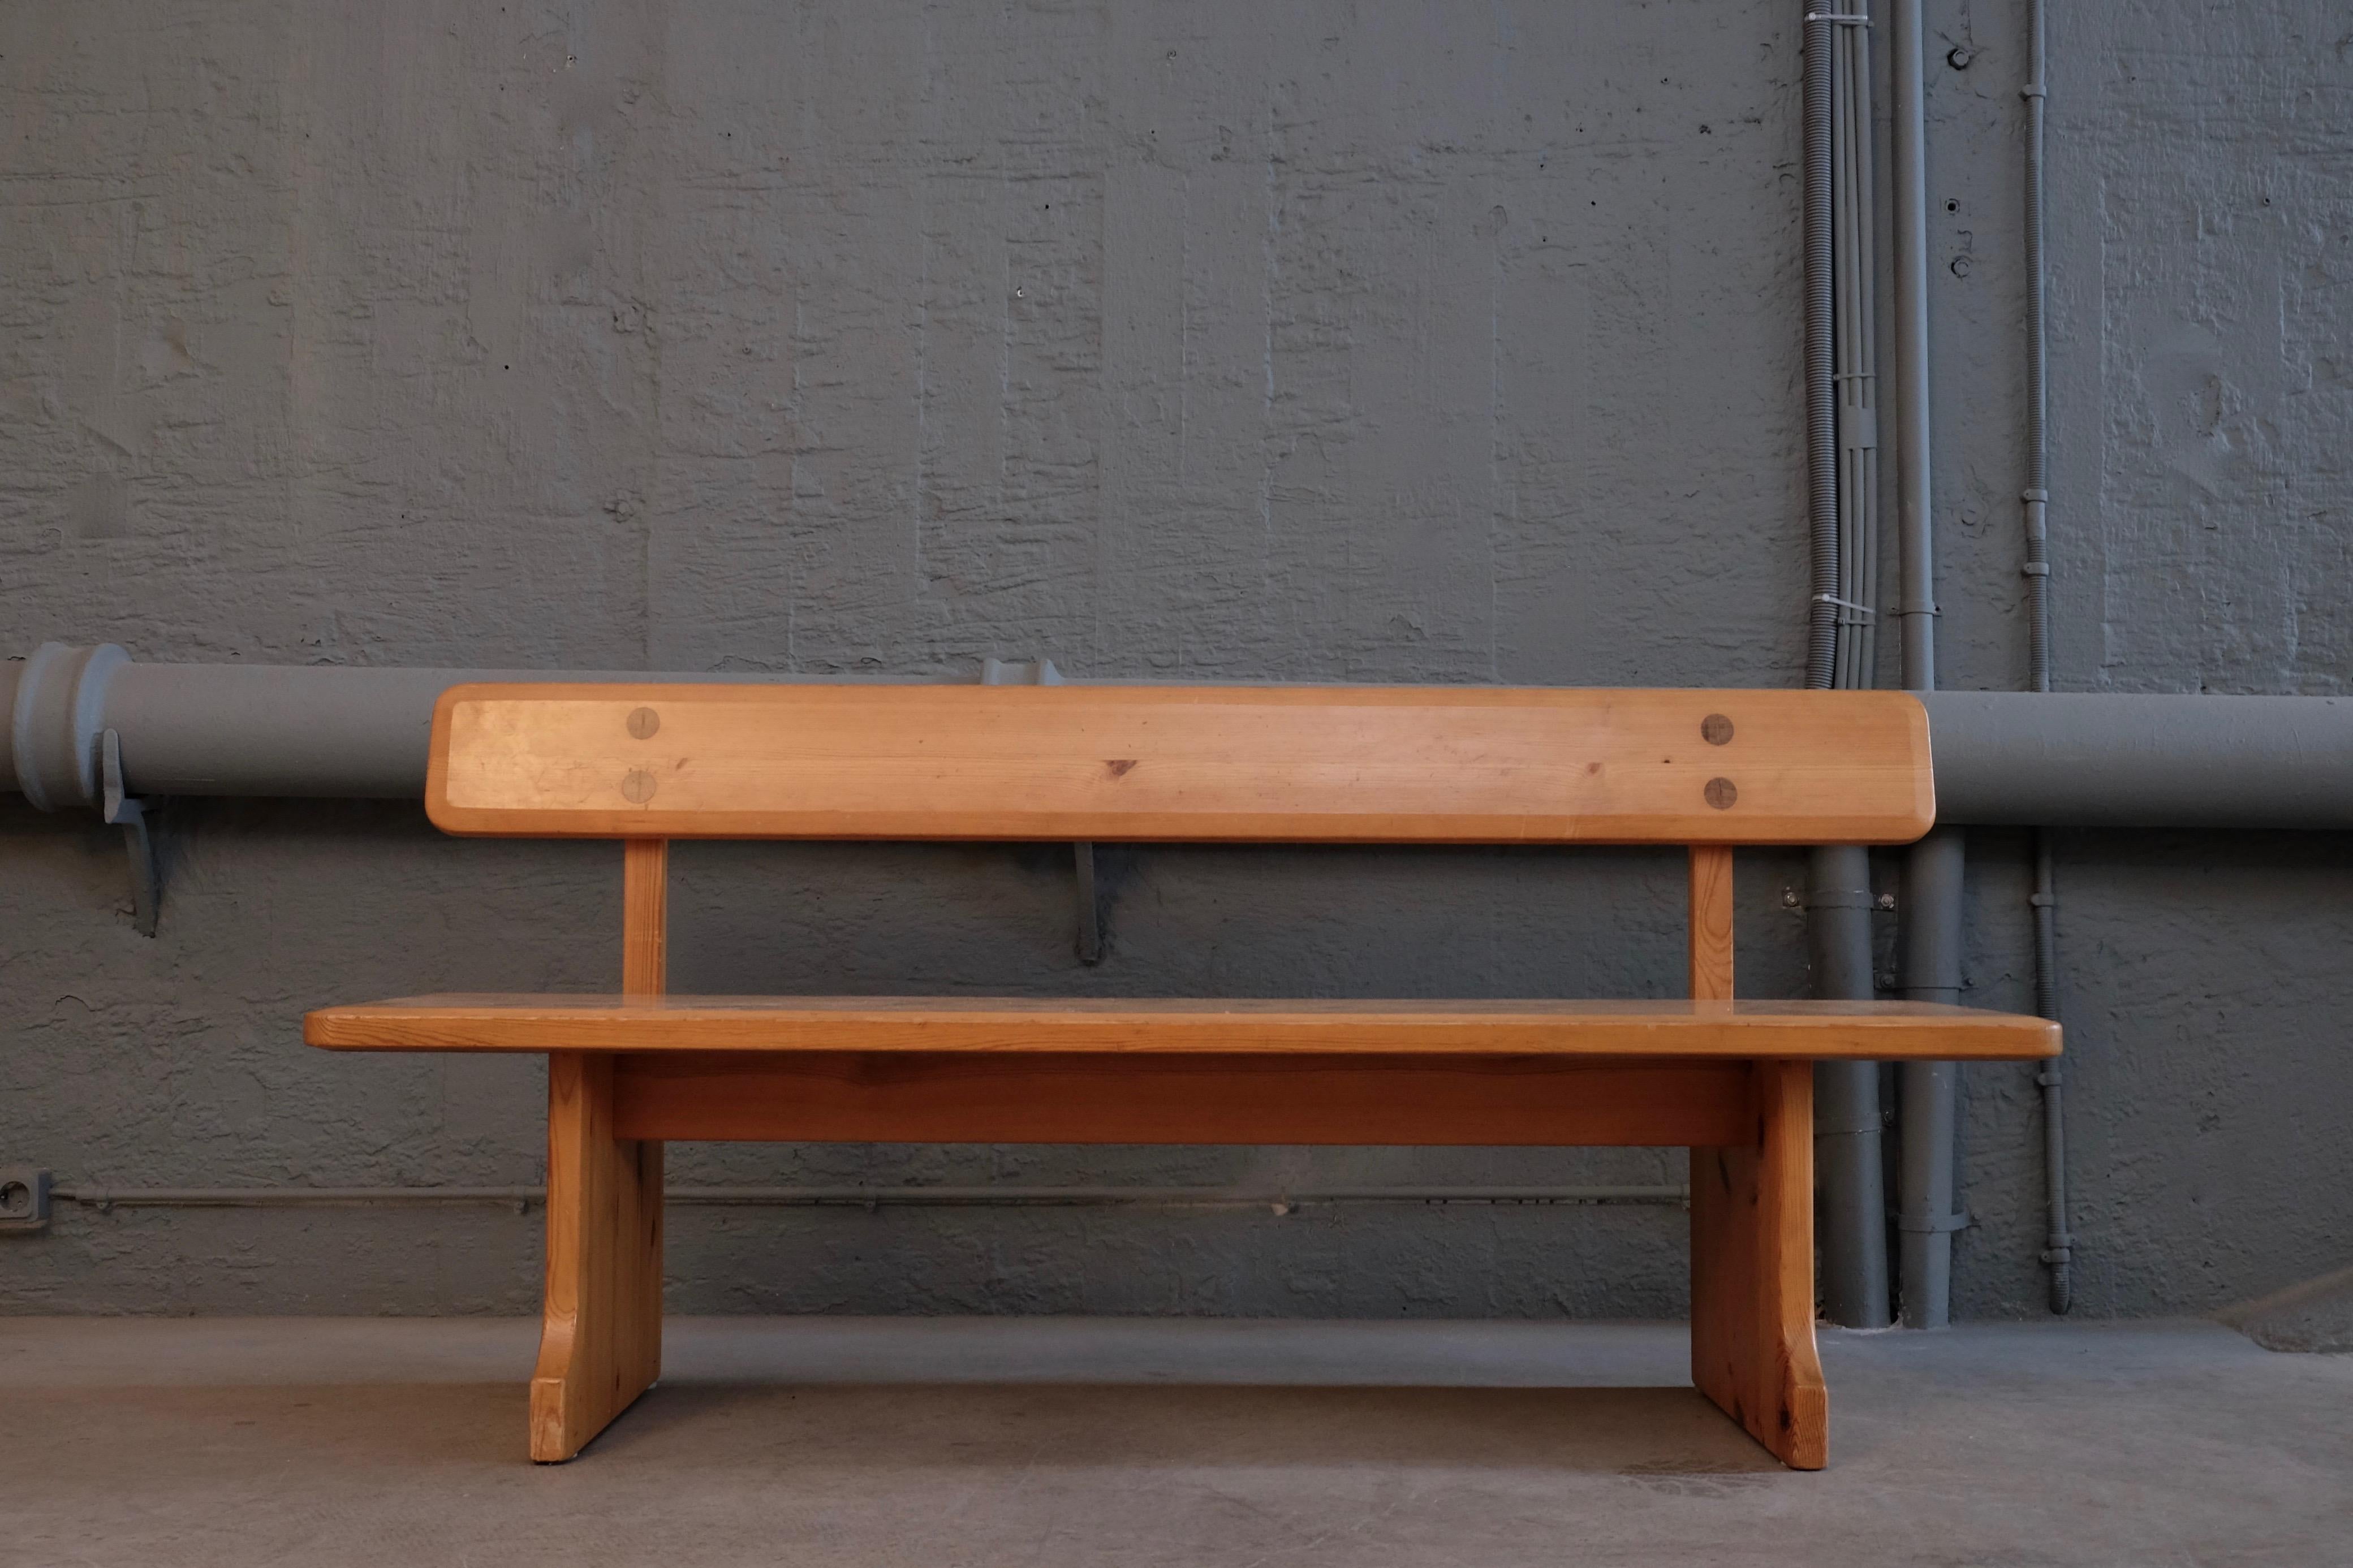 Pine sofa or bench by Karl Andersson & Söner, Sweden, 1960s.
Very good condition, solid and stable.